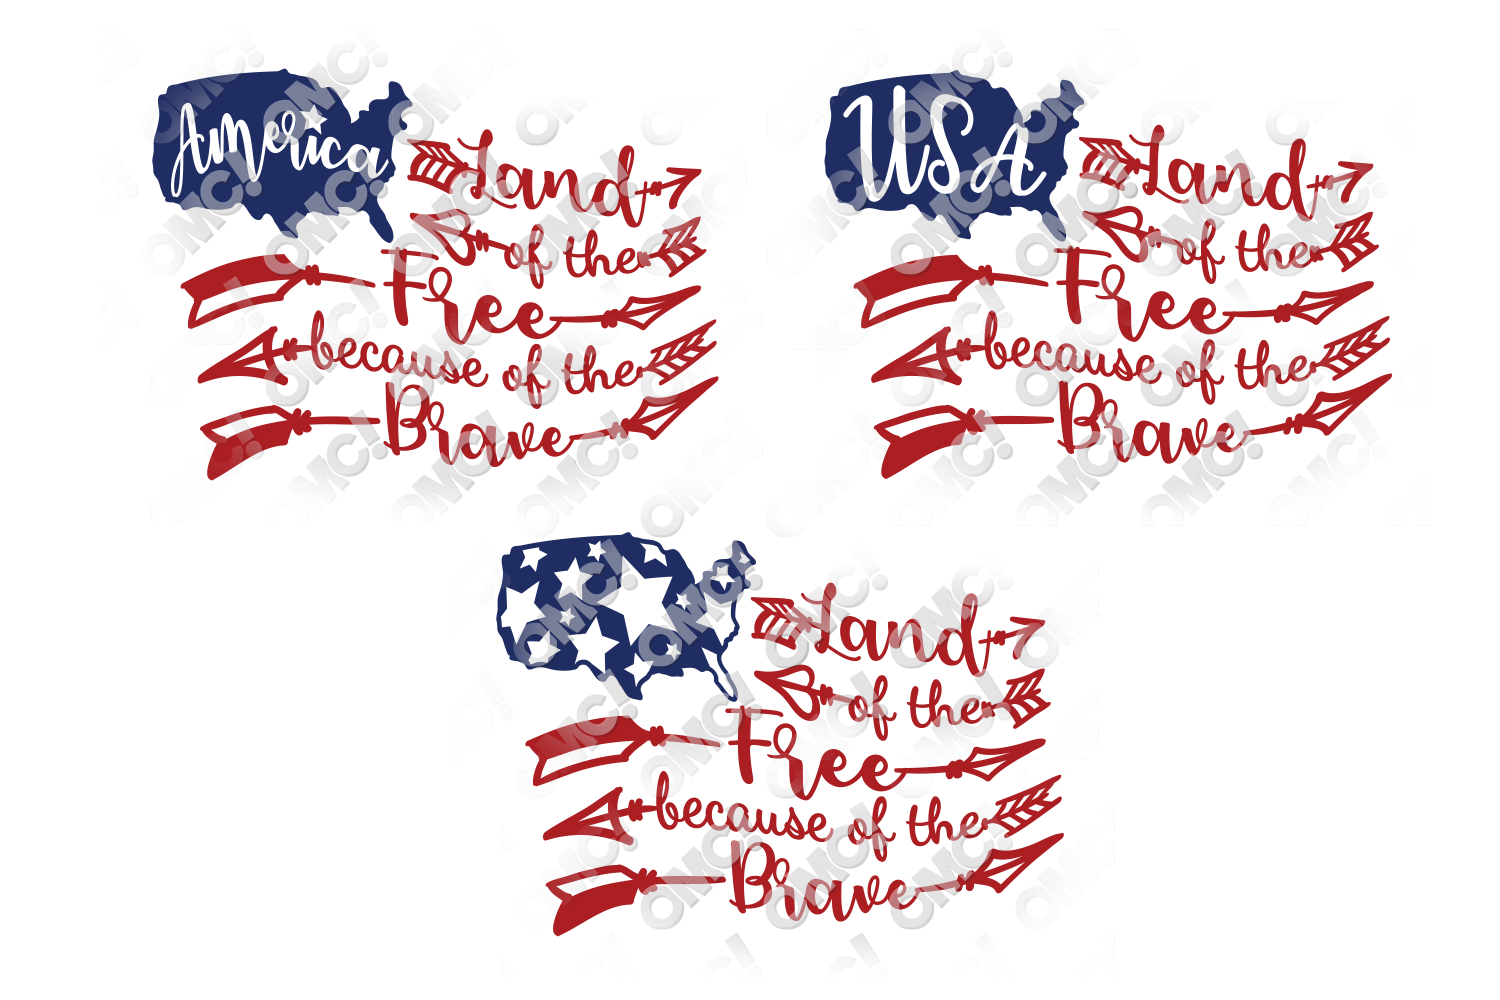 Download Land Of The Free Because Of The Brave SVG, DXF, PNG, EPS,JPG